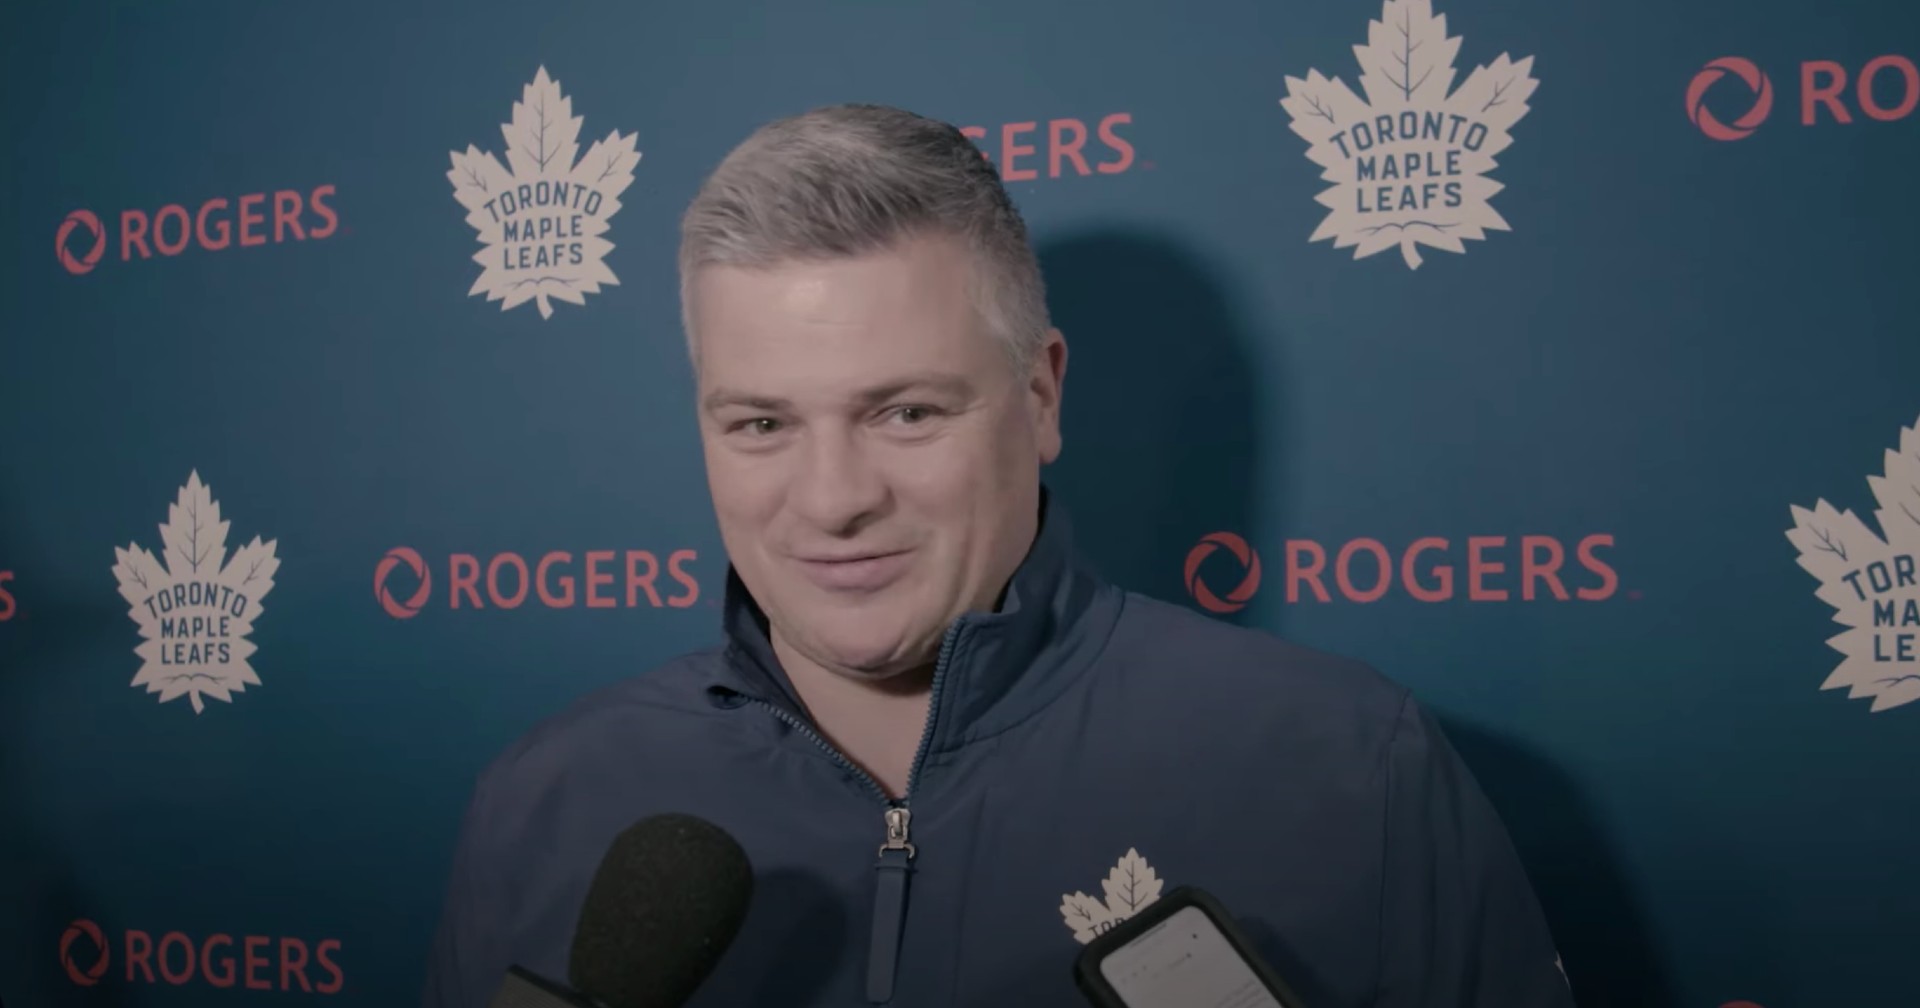 NHL: Maple Leafs, Sheldon Keefe fined during trip to St. Louis